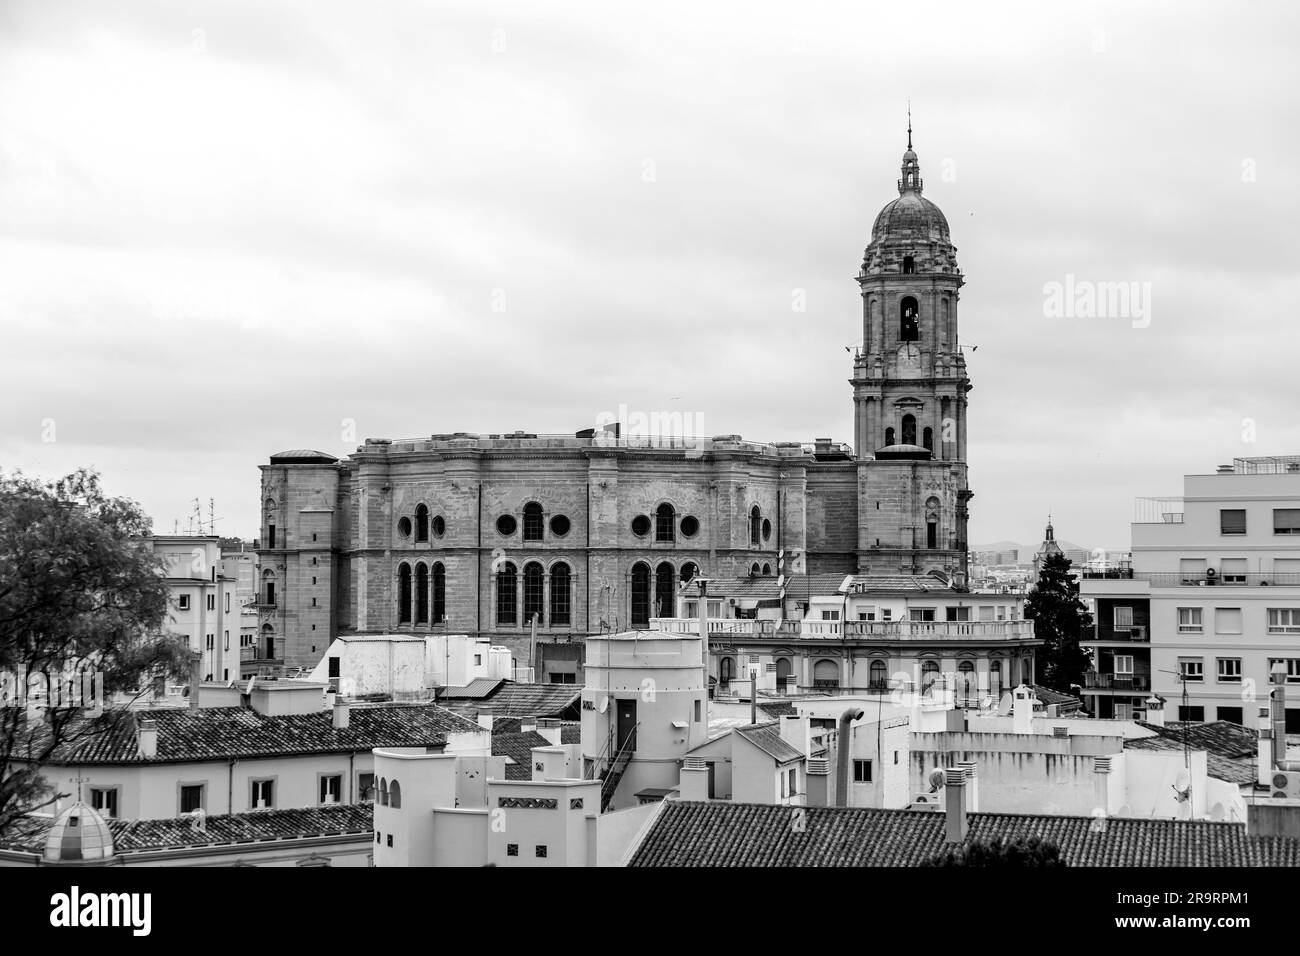 Malaga, Spain - FEB 27, 2022: The Cathedral of Malaga is a Roman Catholic church in Malaga, Andalusia, southern Spain. Renaissance style architecture Stock Photo